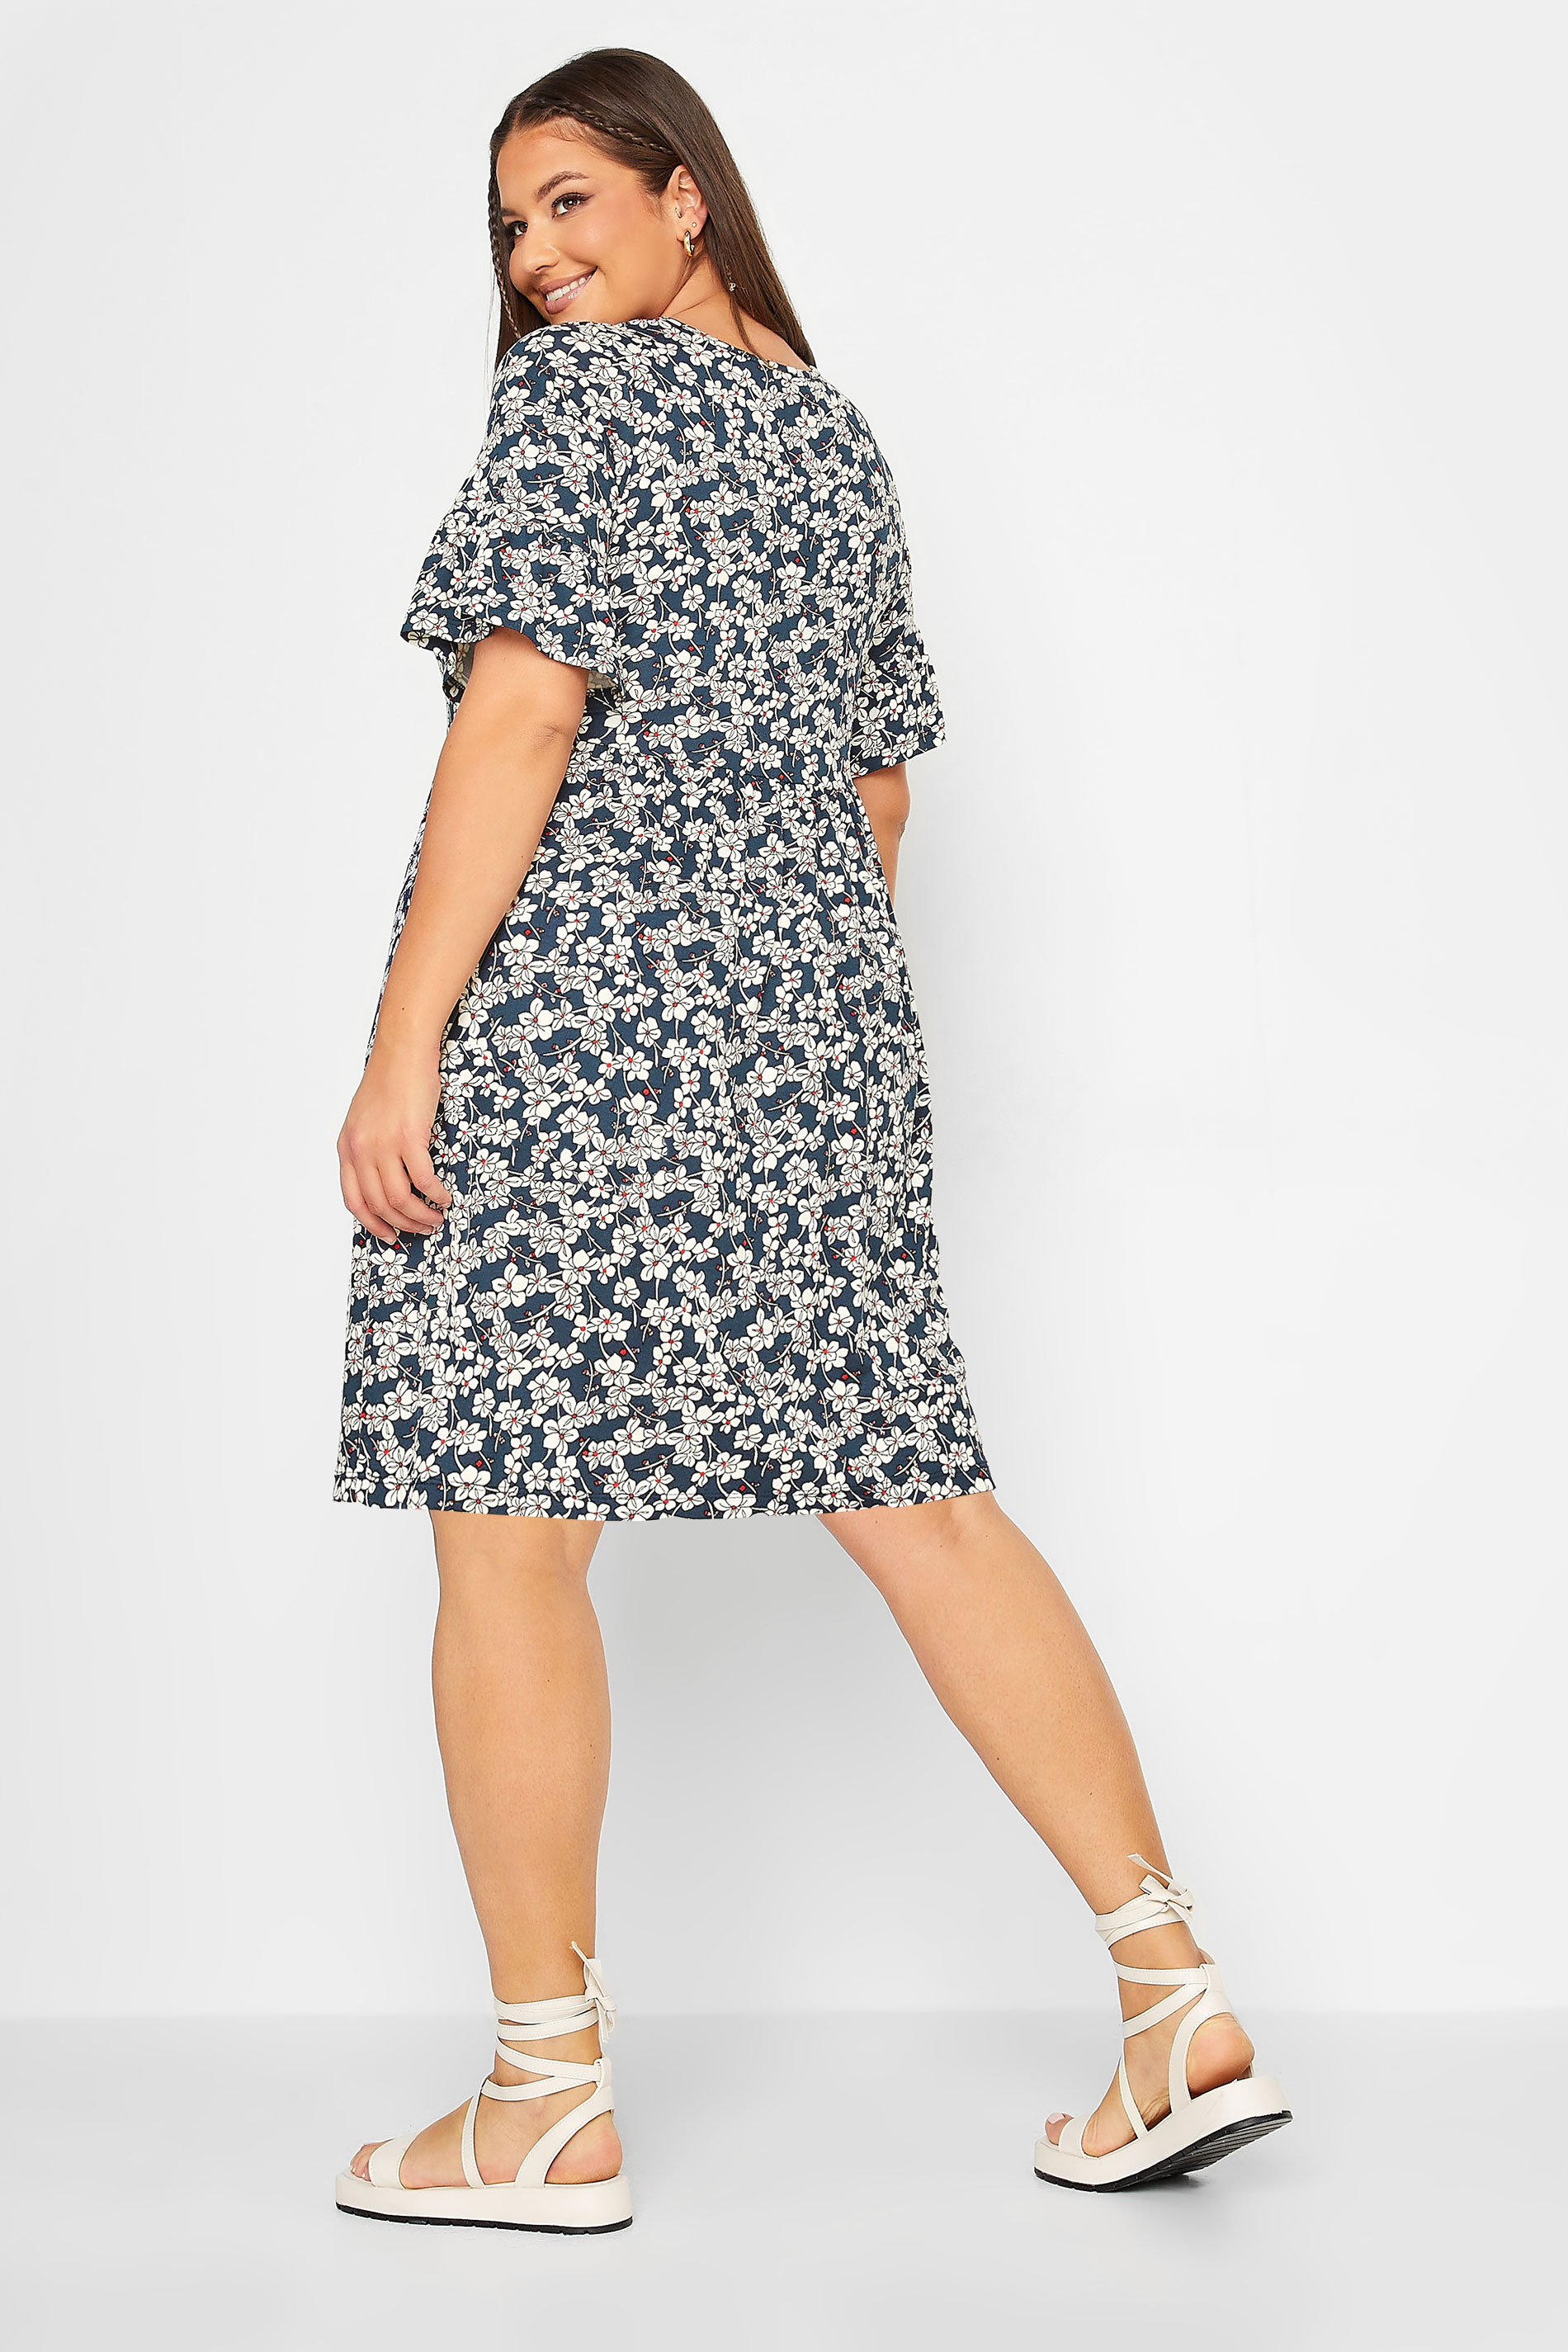 YOURS Curve Plus Size Navy Blue Ditsy Floral Print Smock Tunic Dress | Yours Clothing  3